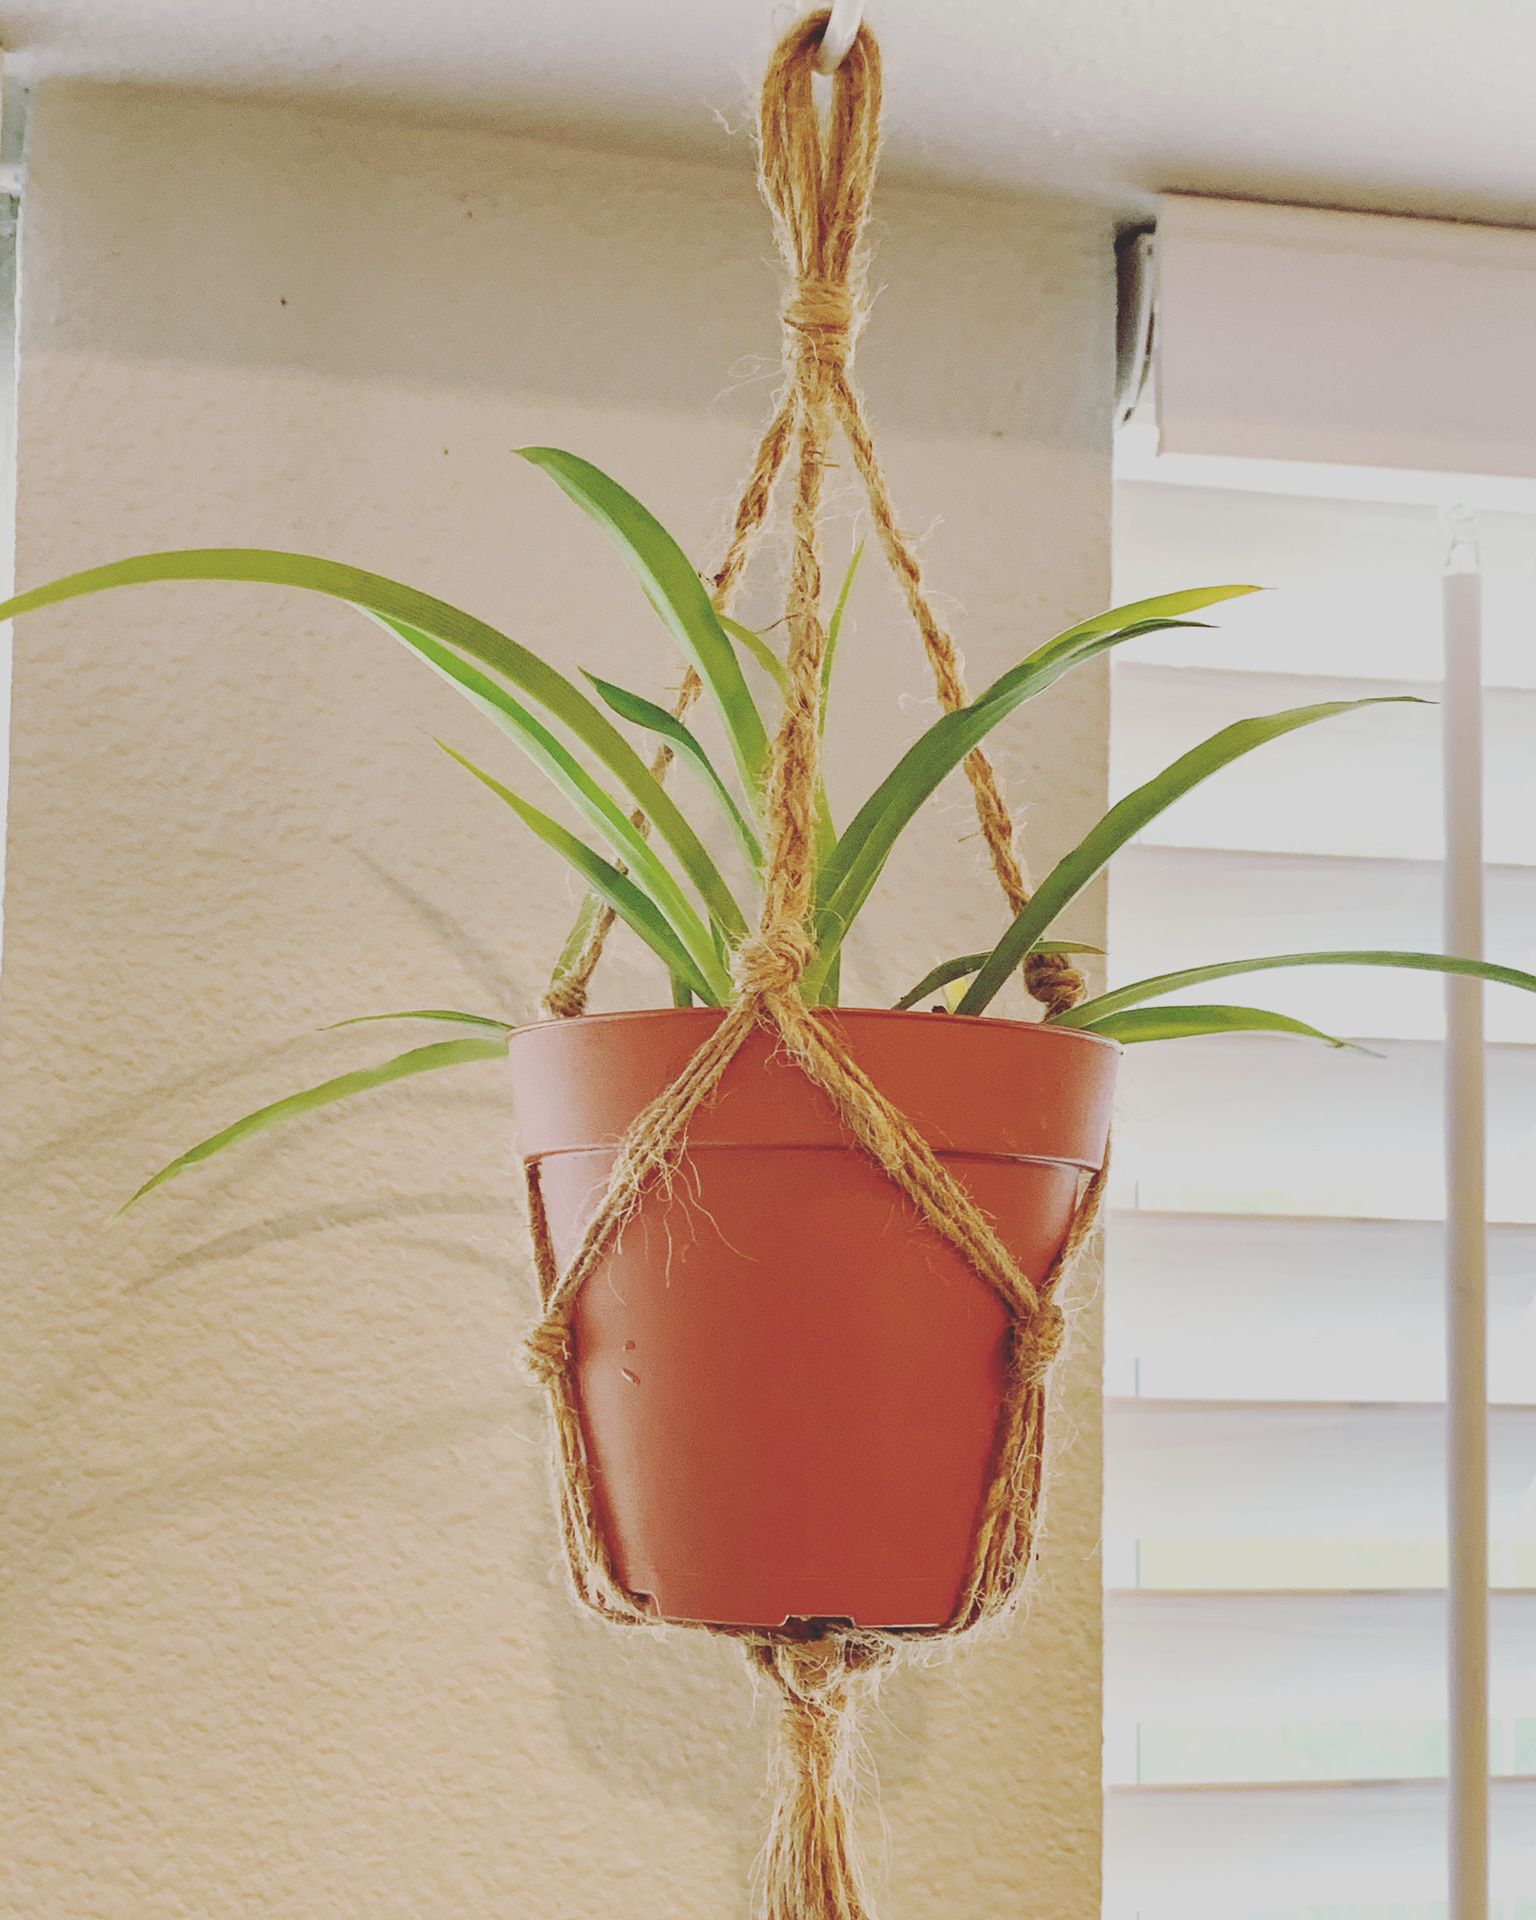 Homemade plant hanger W/ real Spider Plant 🌱